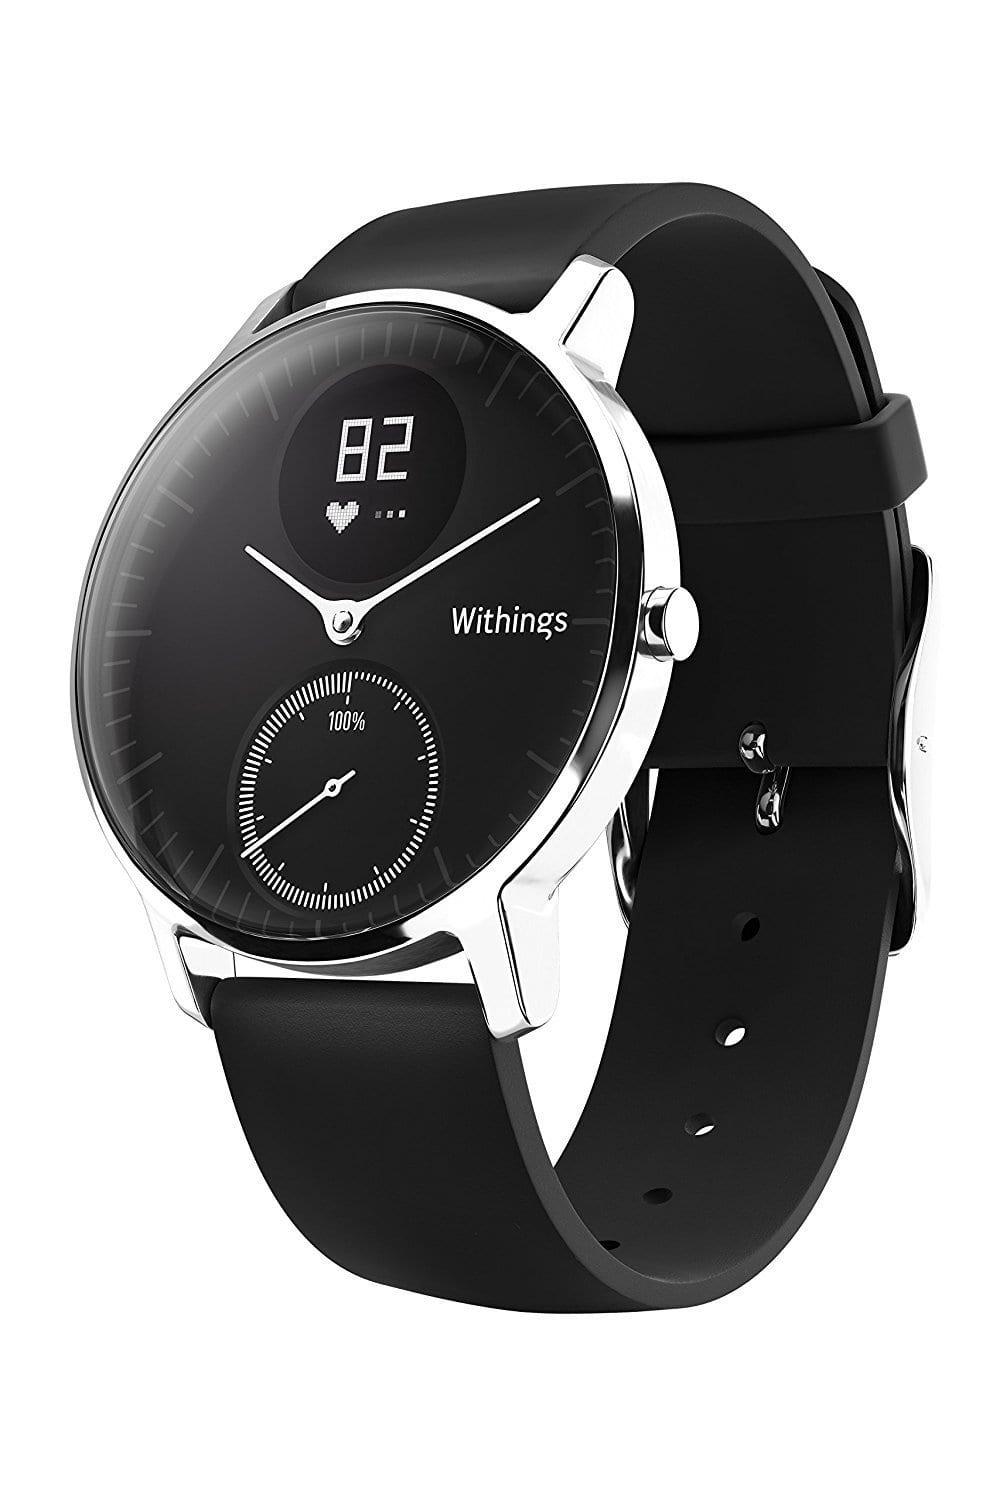 Withings Activity Tracker